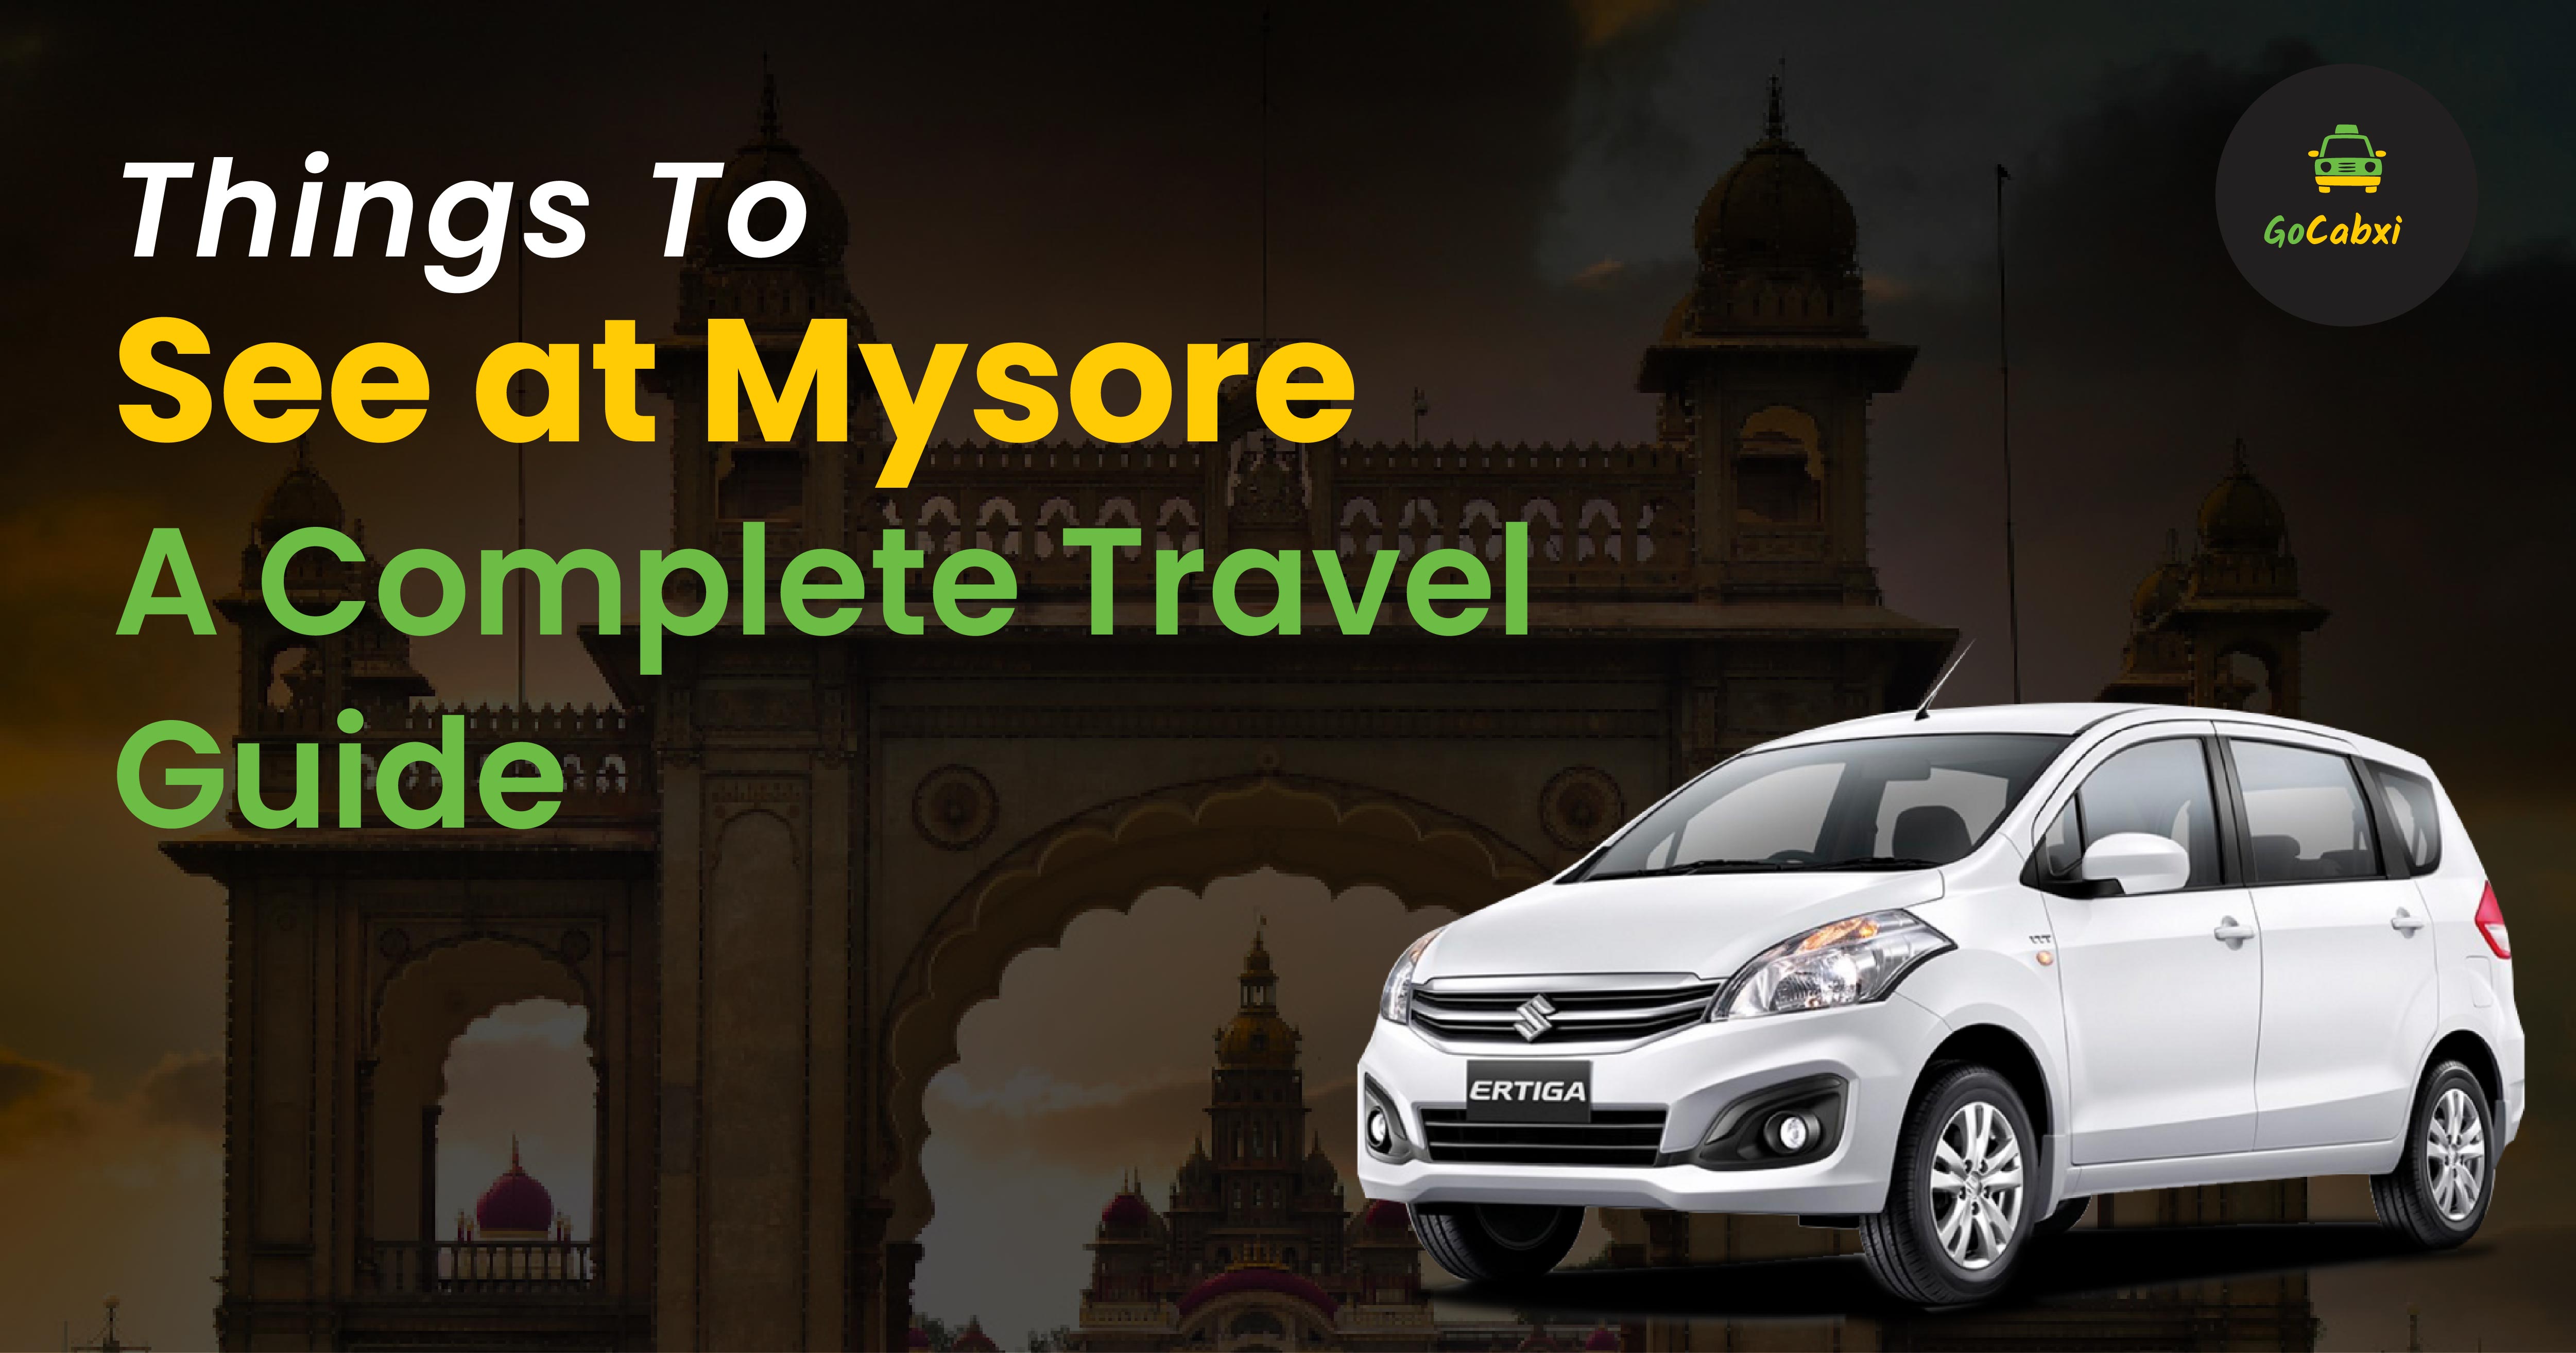 Things to See At Mysore: A complete Travel Guide